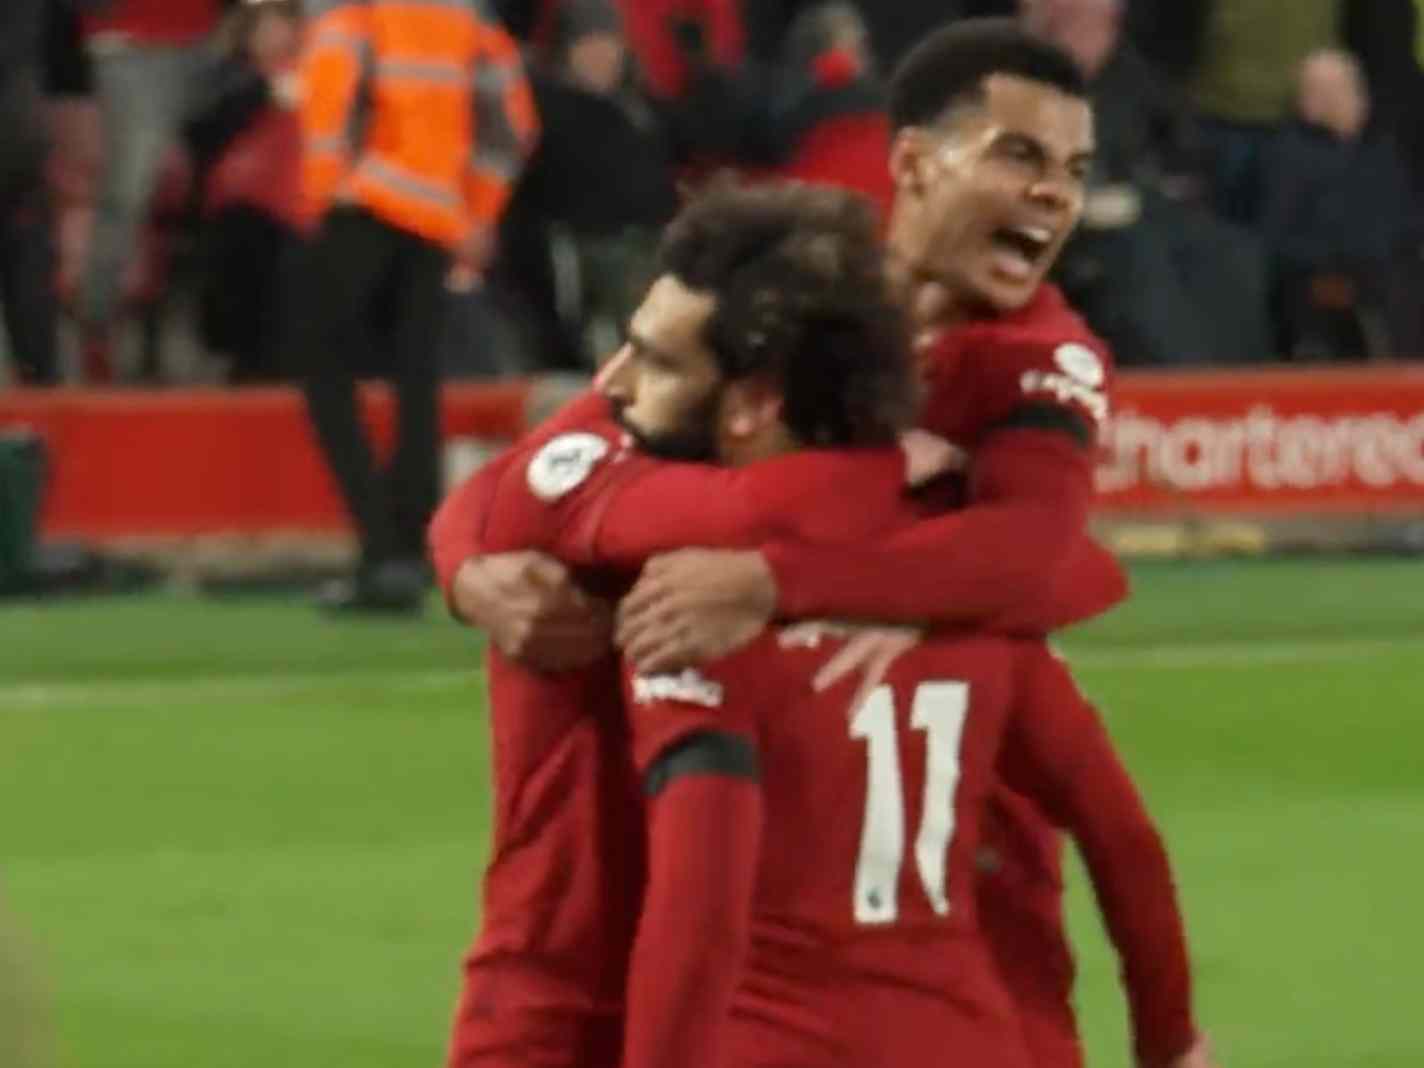 Liverpool 2-0 Everton: Mo Salah Finishes 13-Seconds Counterattack